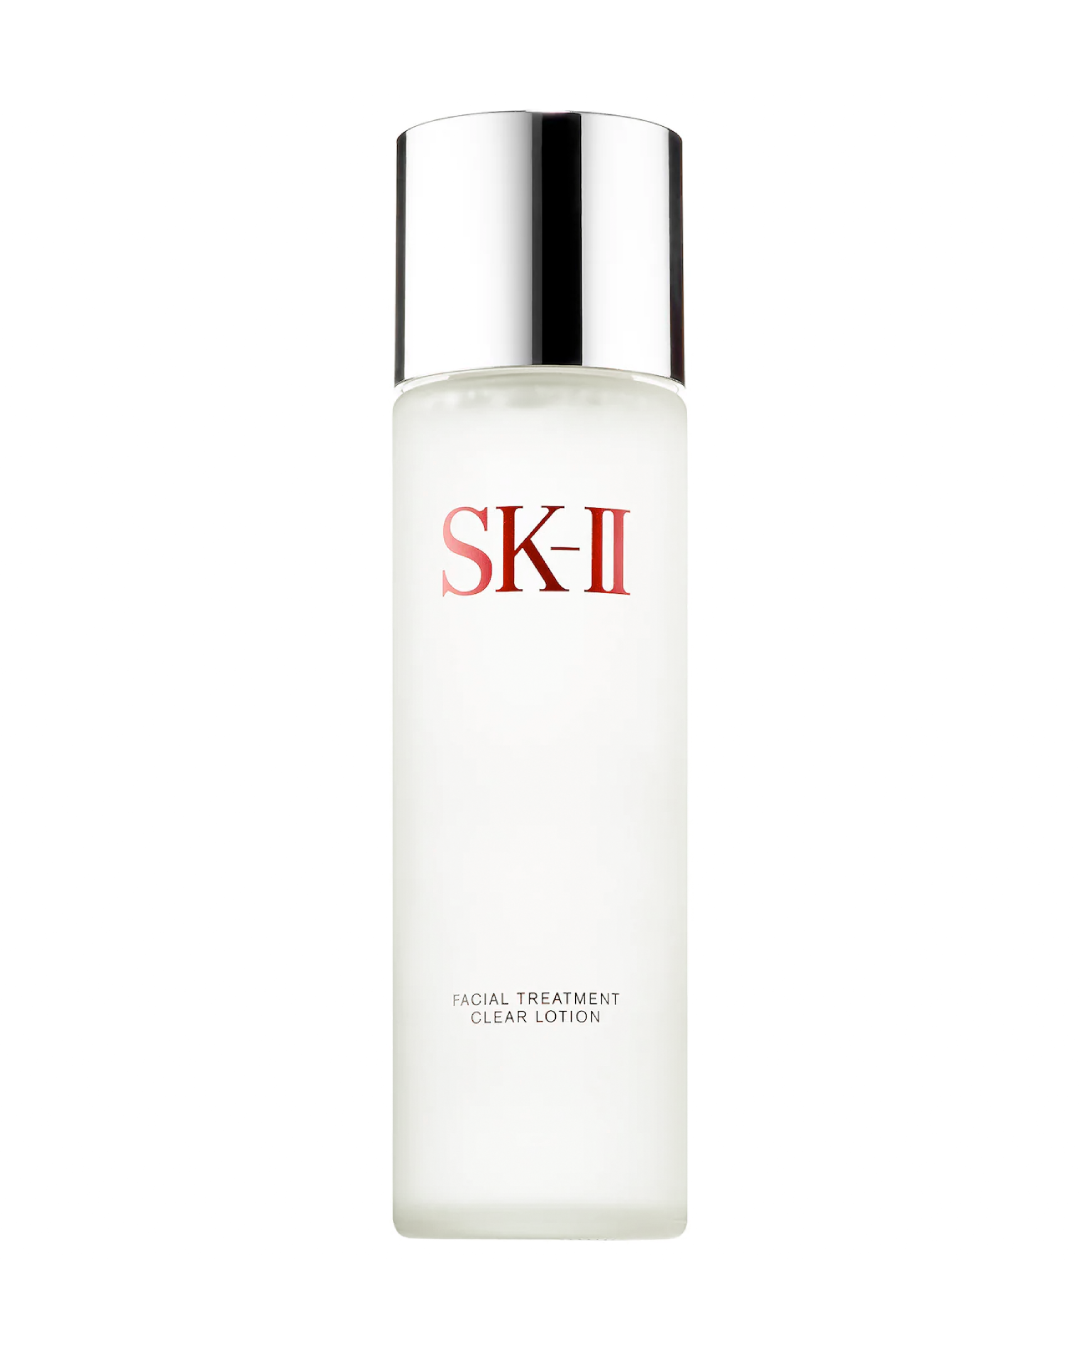 SK-II Facial Treatment Clear Lotion (160ml) - Best Buy World Philippines